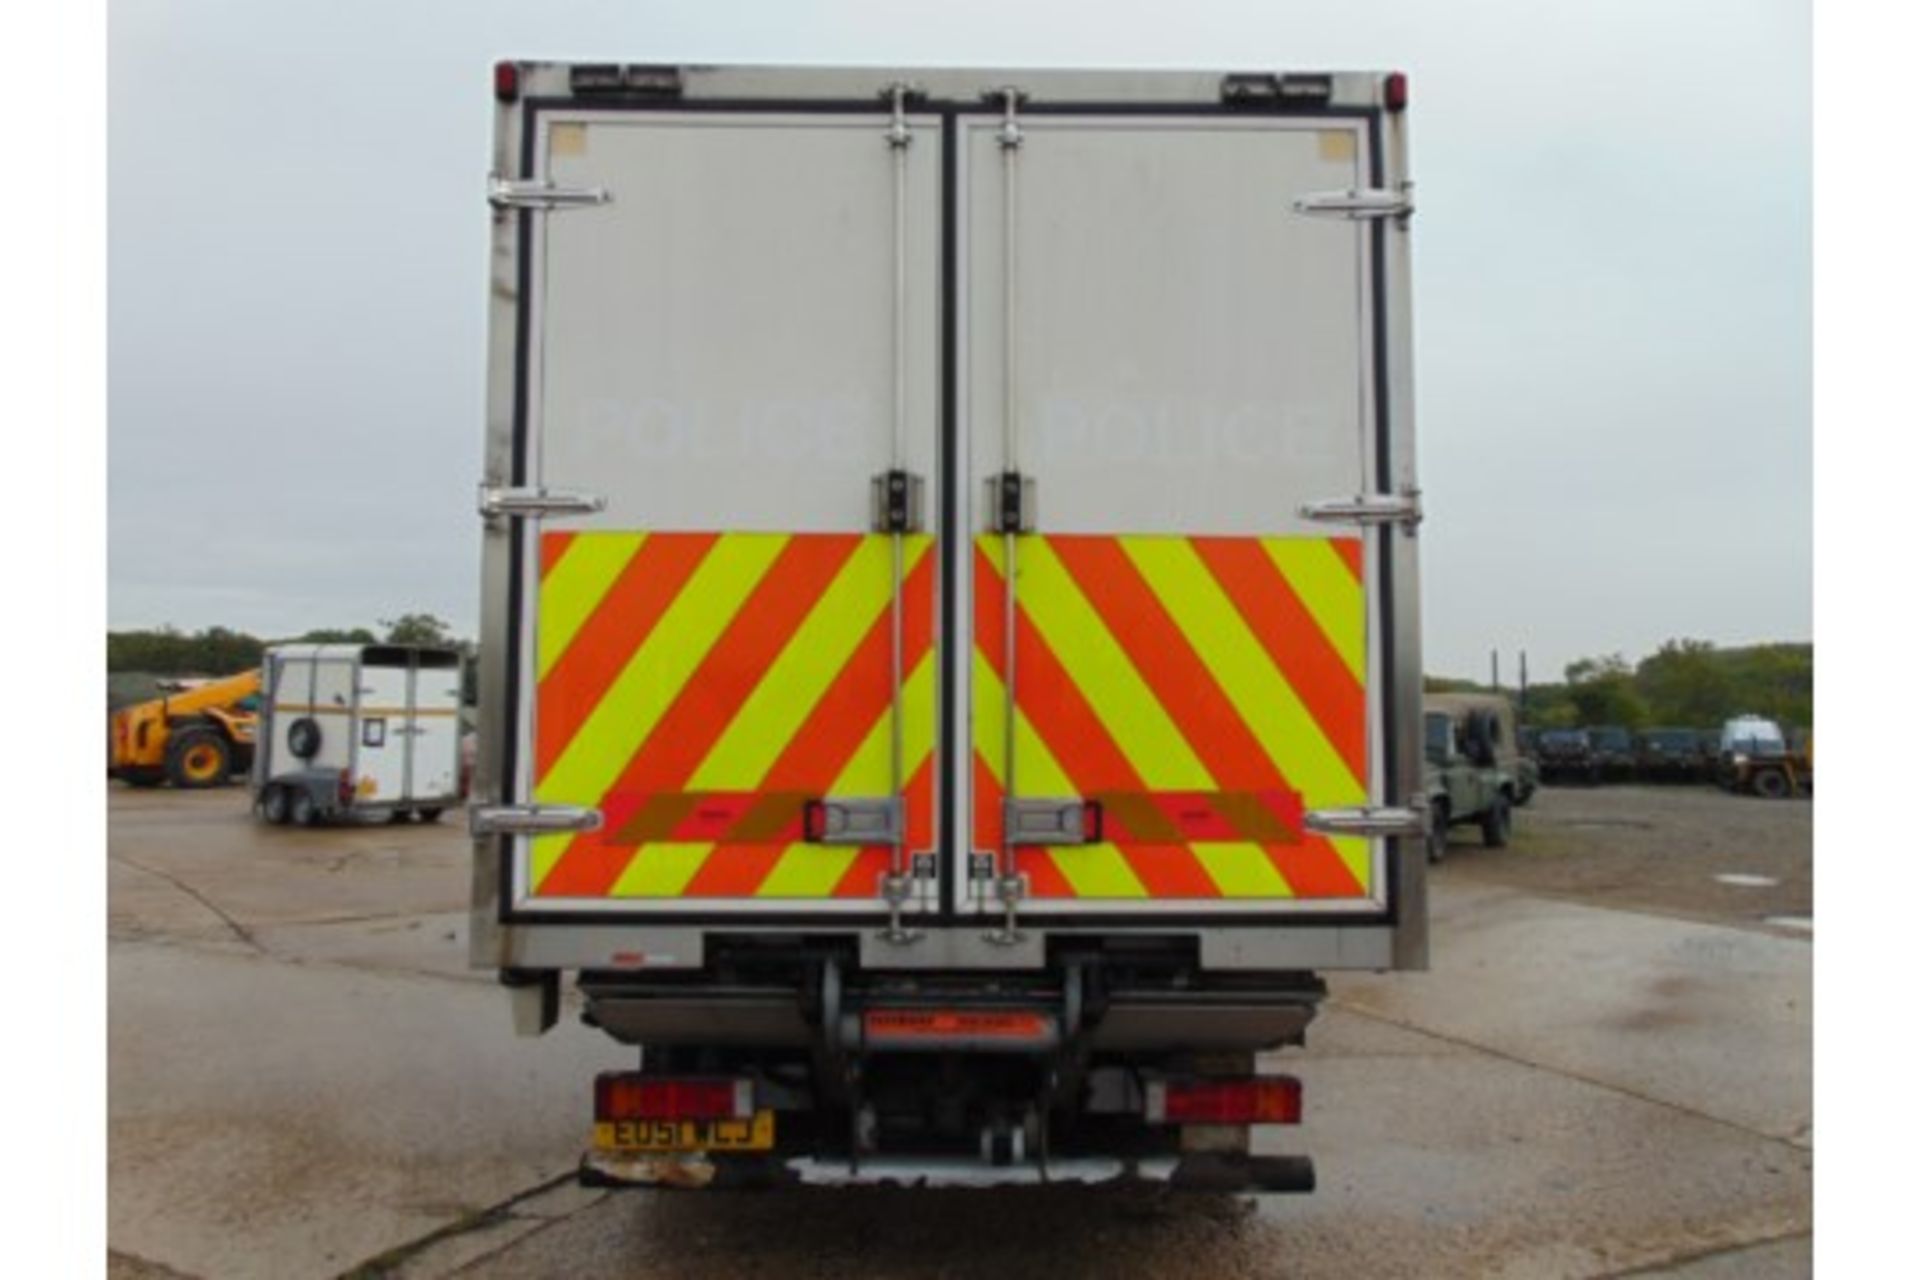 2001 Mercedes Benz Atego 1018 Box Truck C/W Tail Lift - Image 6 of 21